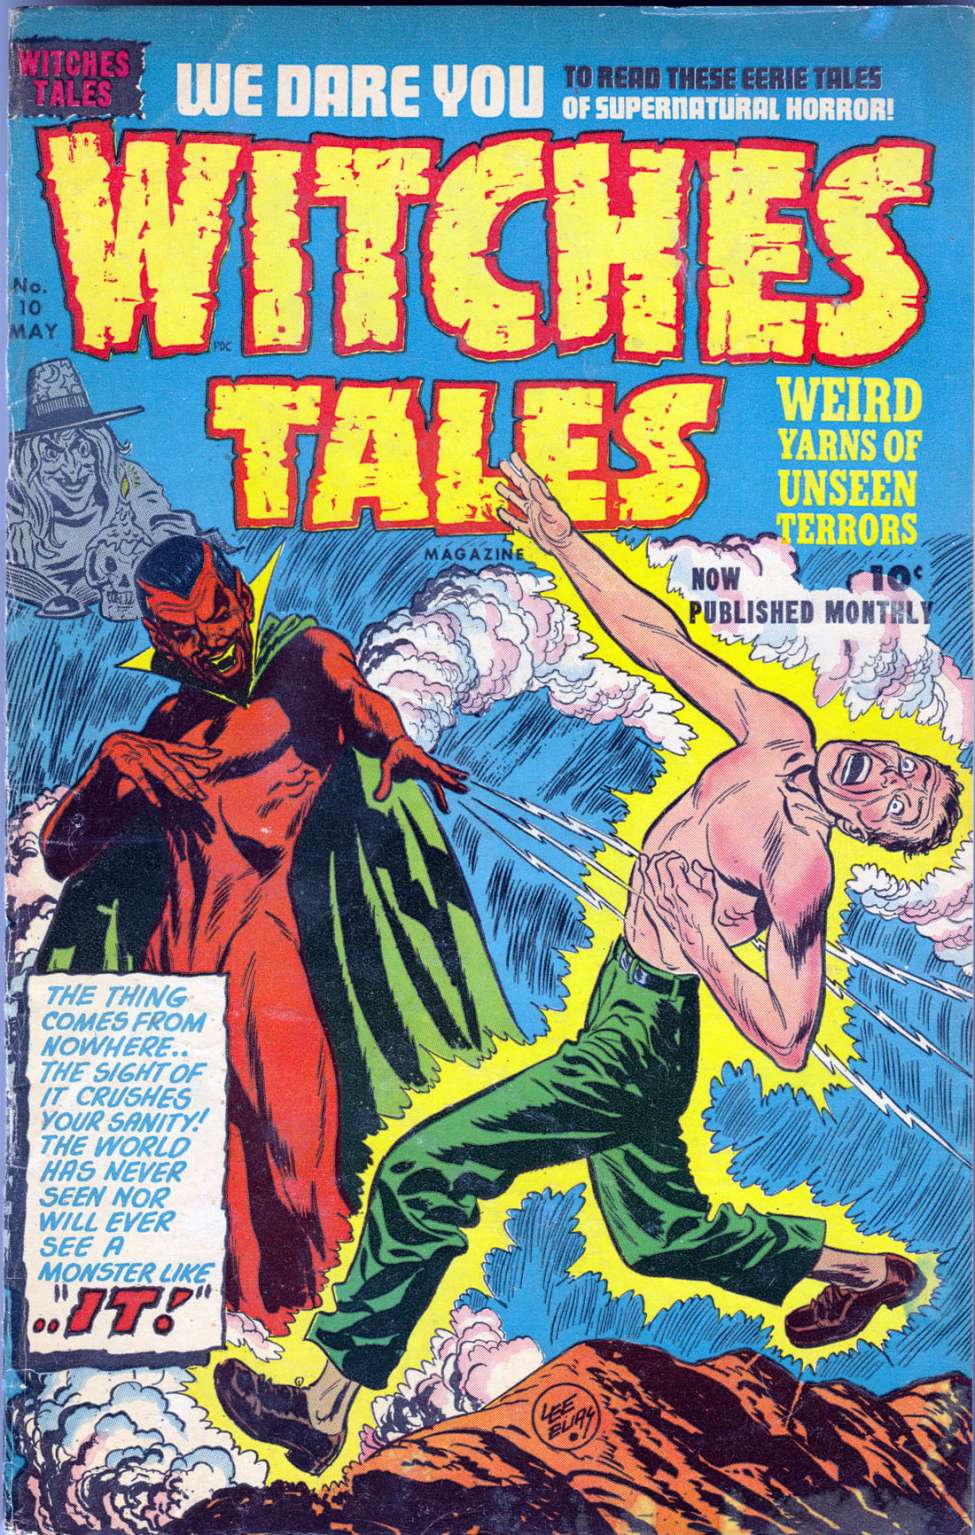 Book Cover For Witches Tales 10 (alt) - Version 2